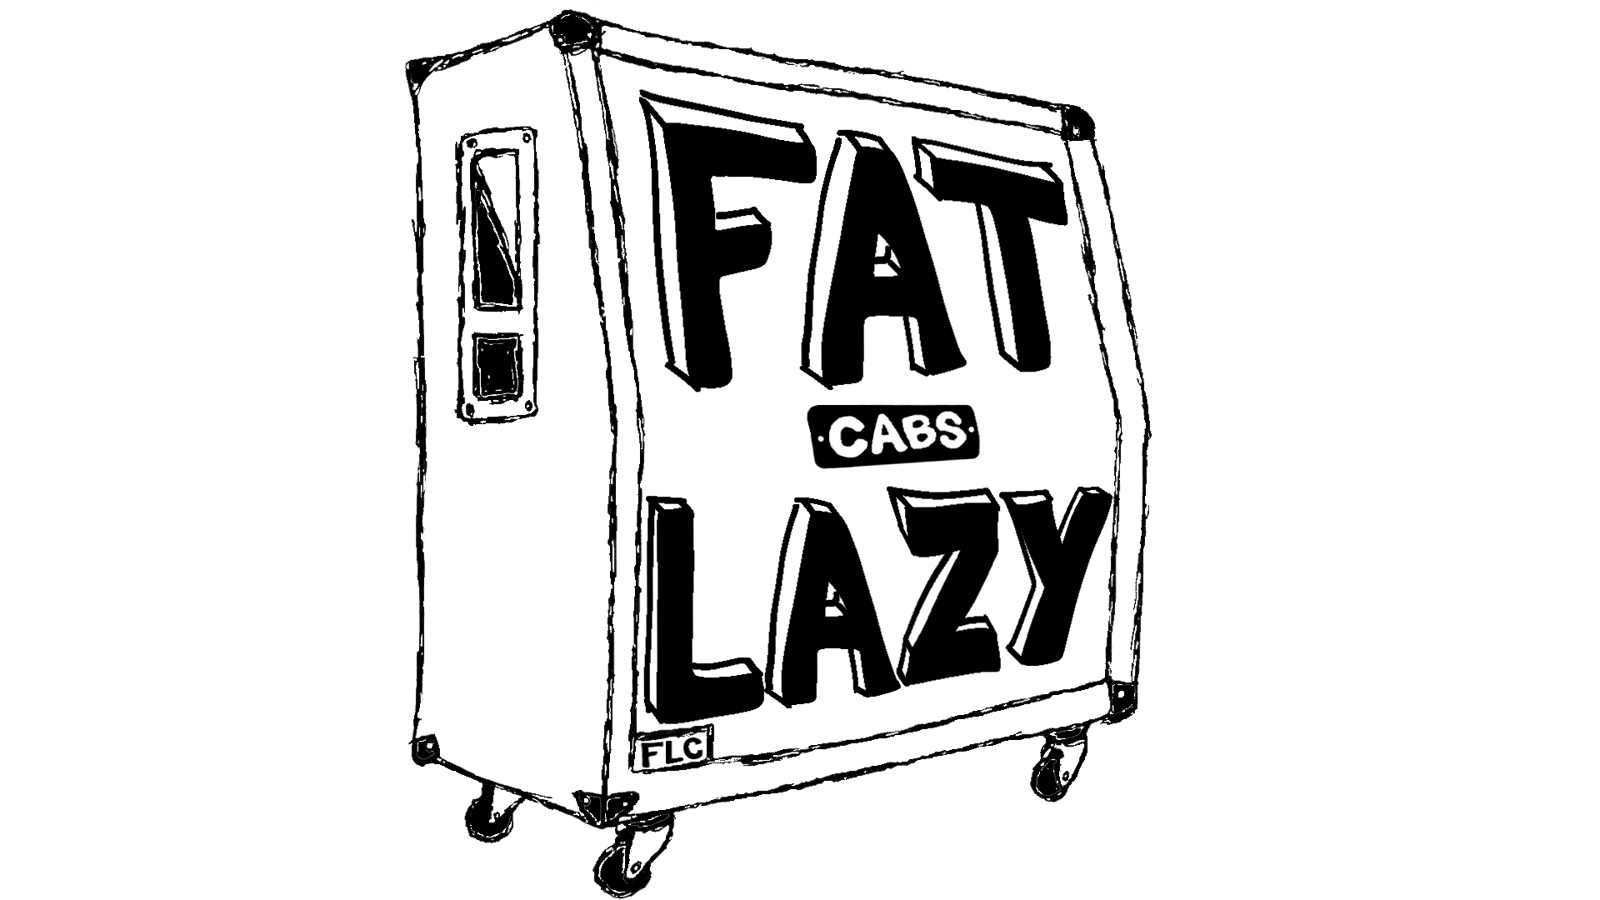 Fat Lazy Cabs